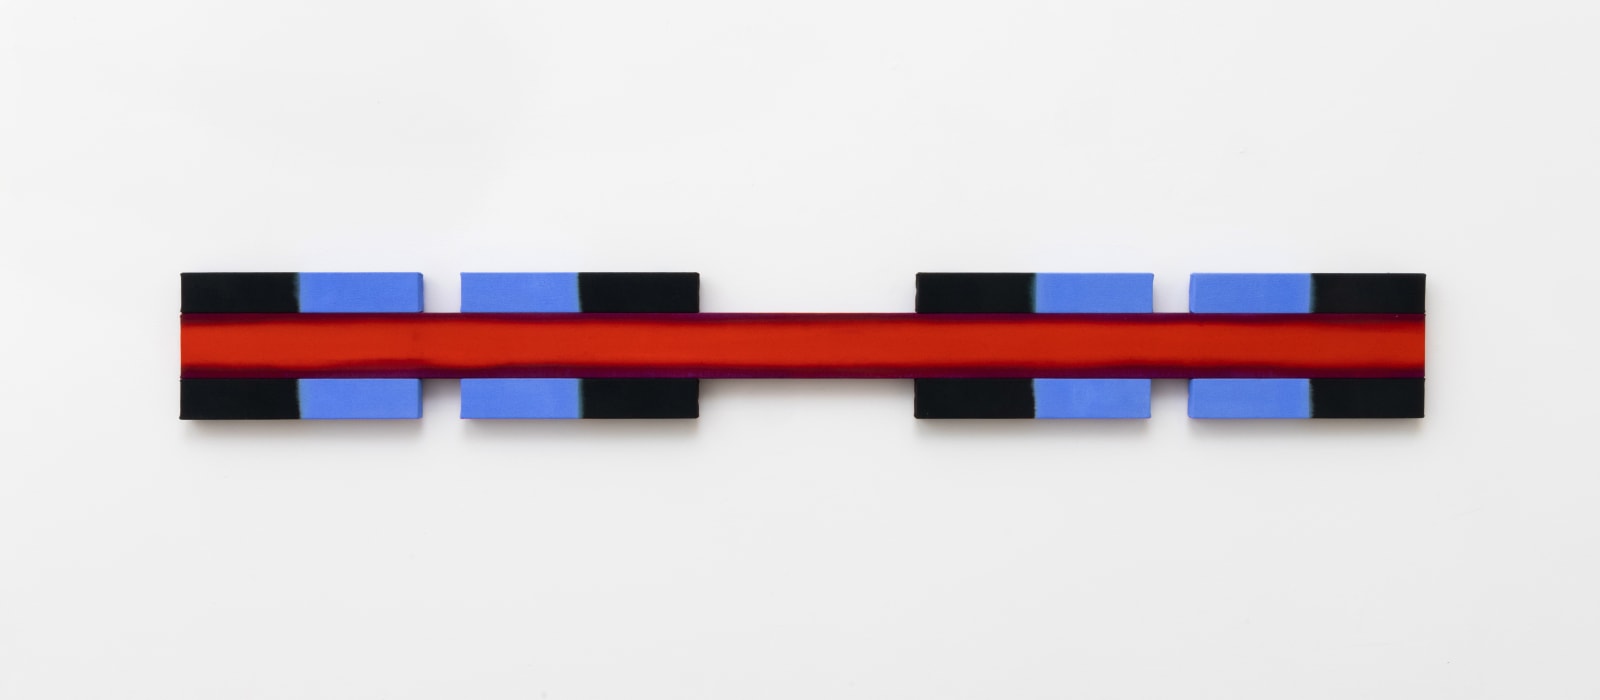 Horizontal shaped canvas painting stretched on nine wooden bars varying in length and colors of black, red, and blue.